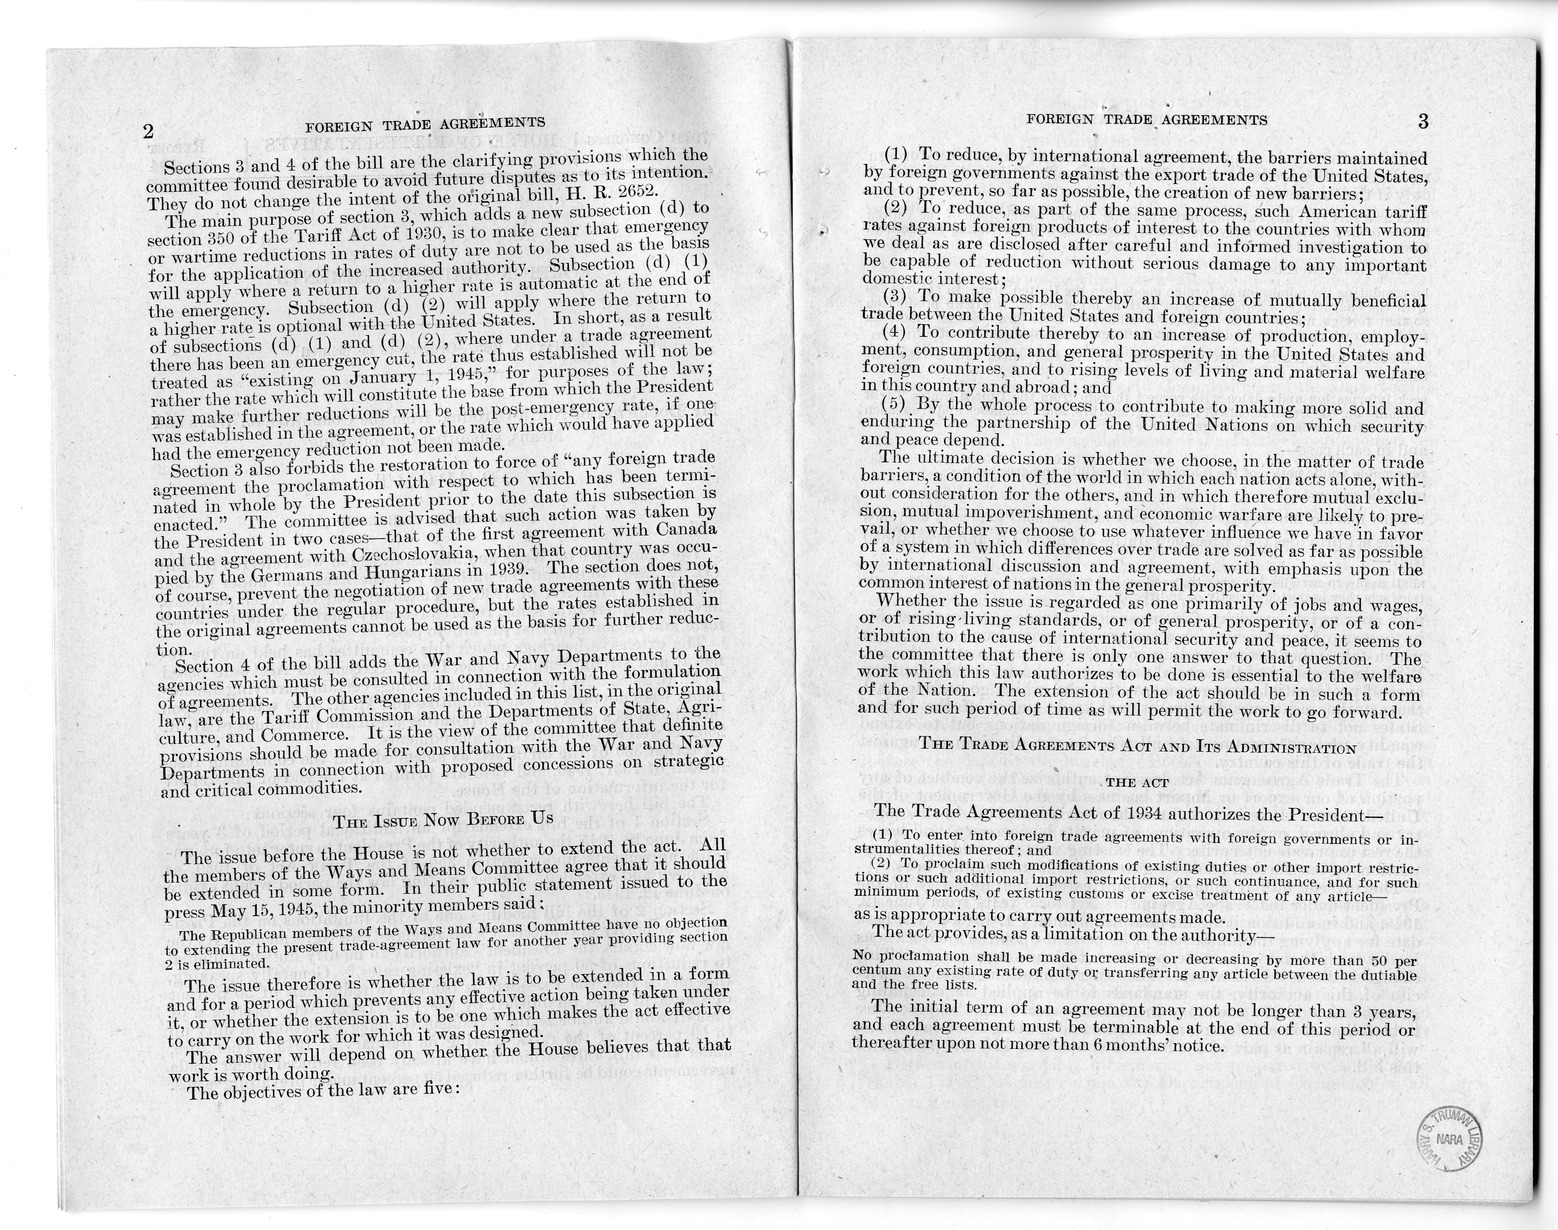 Memorandum from Harold D. Smith to M. C. Latta, H.R. 3240, to Extend the Authority of the President Under Section 350 of the Tariff Act of 1930, with Attachments